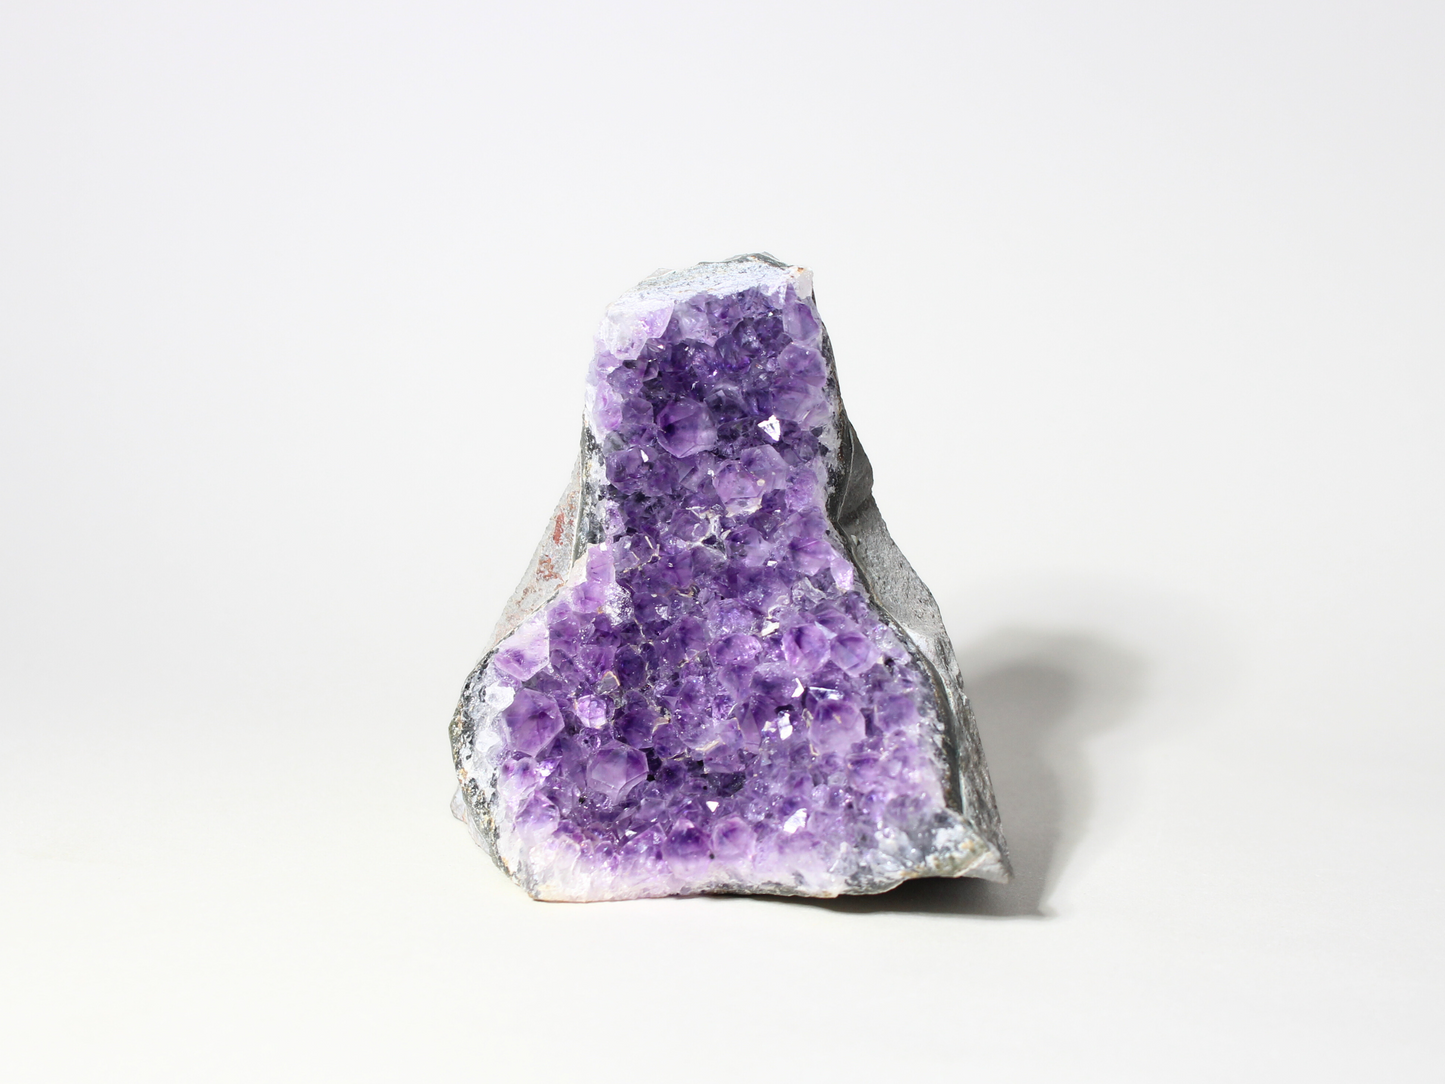 Standing Amethyst Cluster "A" Grade with Cut Base